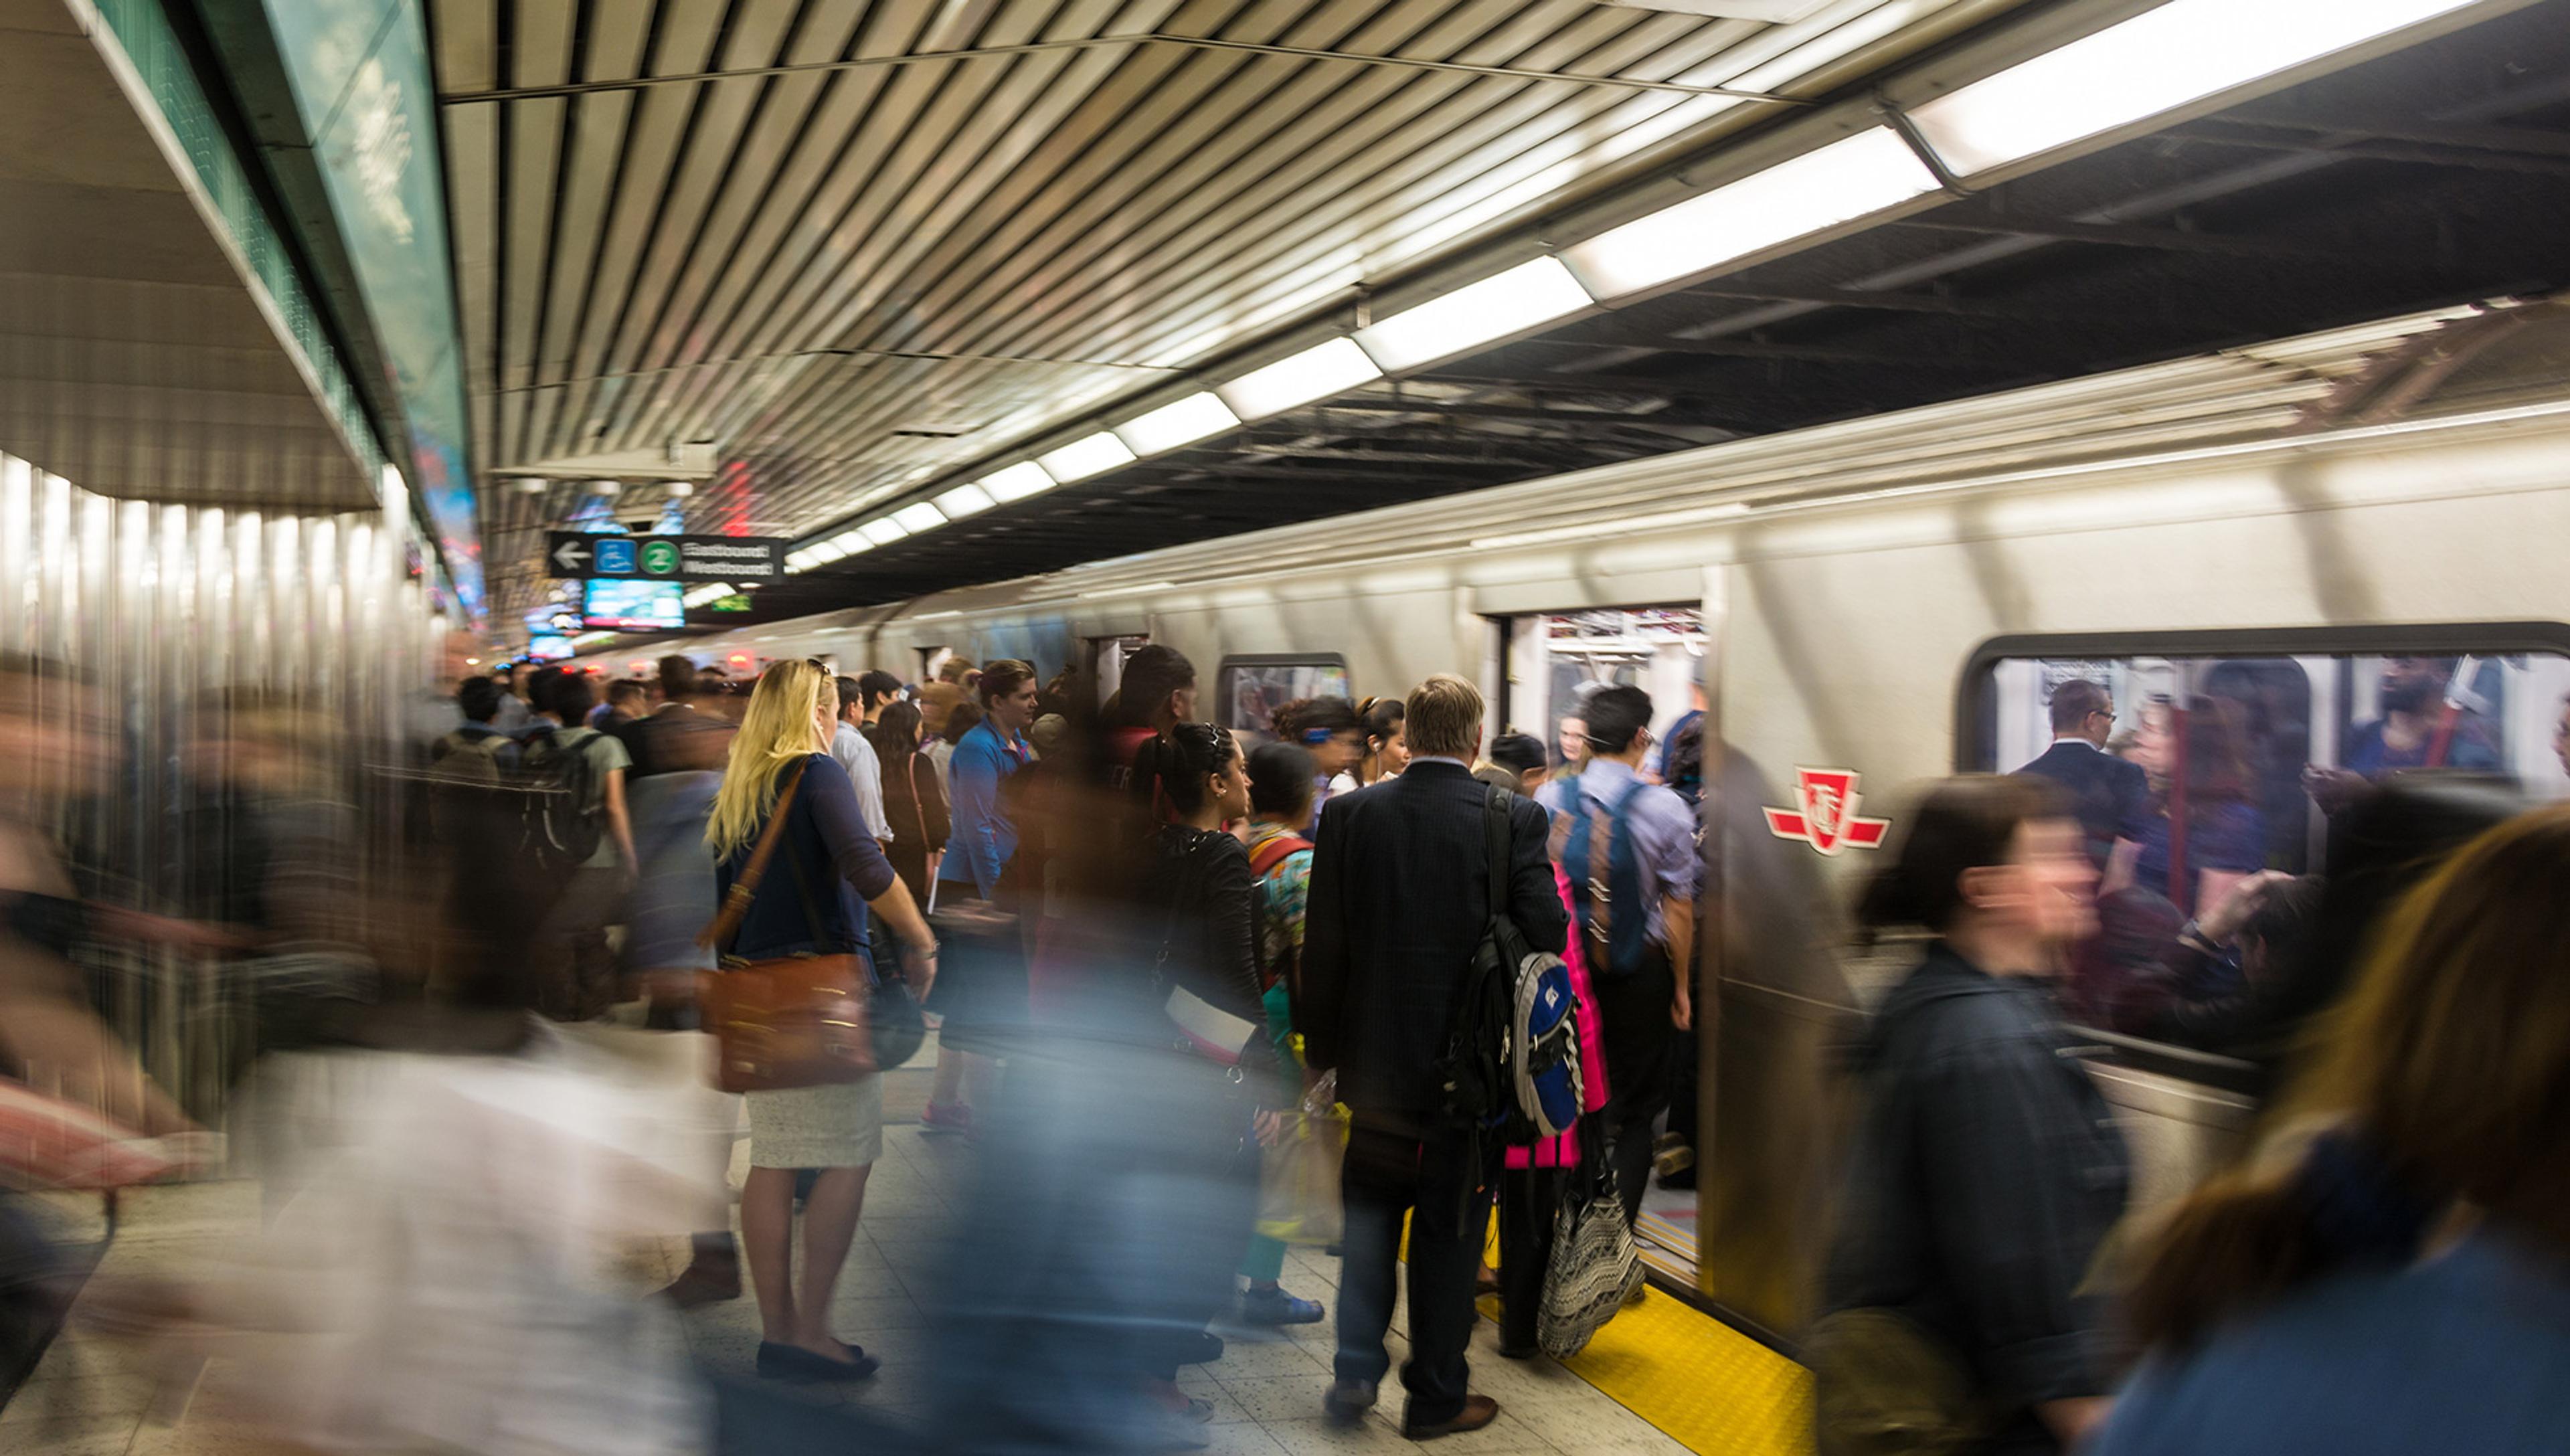 A train arrives at a busy subway station. Many different people on the platform wait to get on the train. Some are blurred as they are caught by the camera mid-motion.